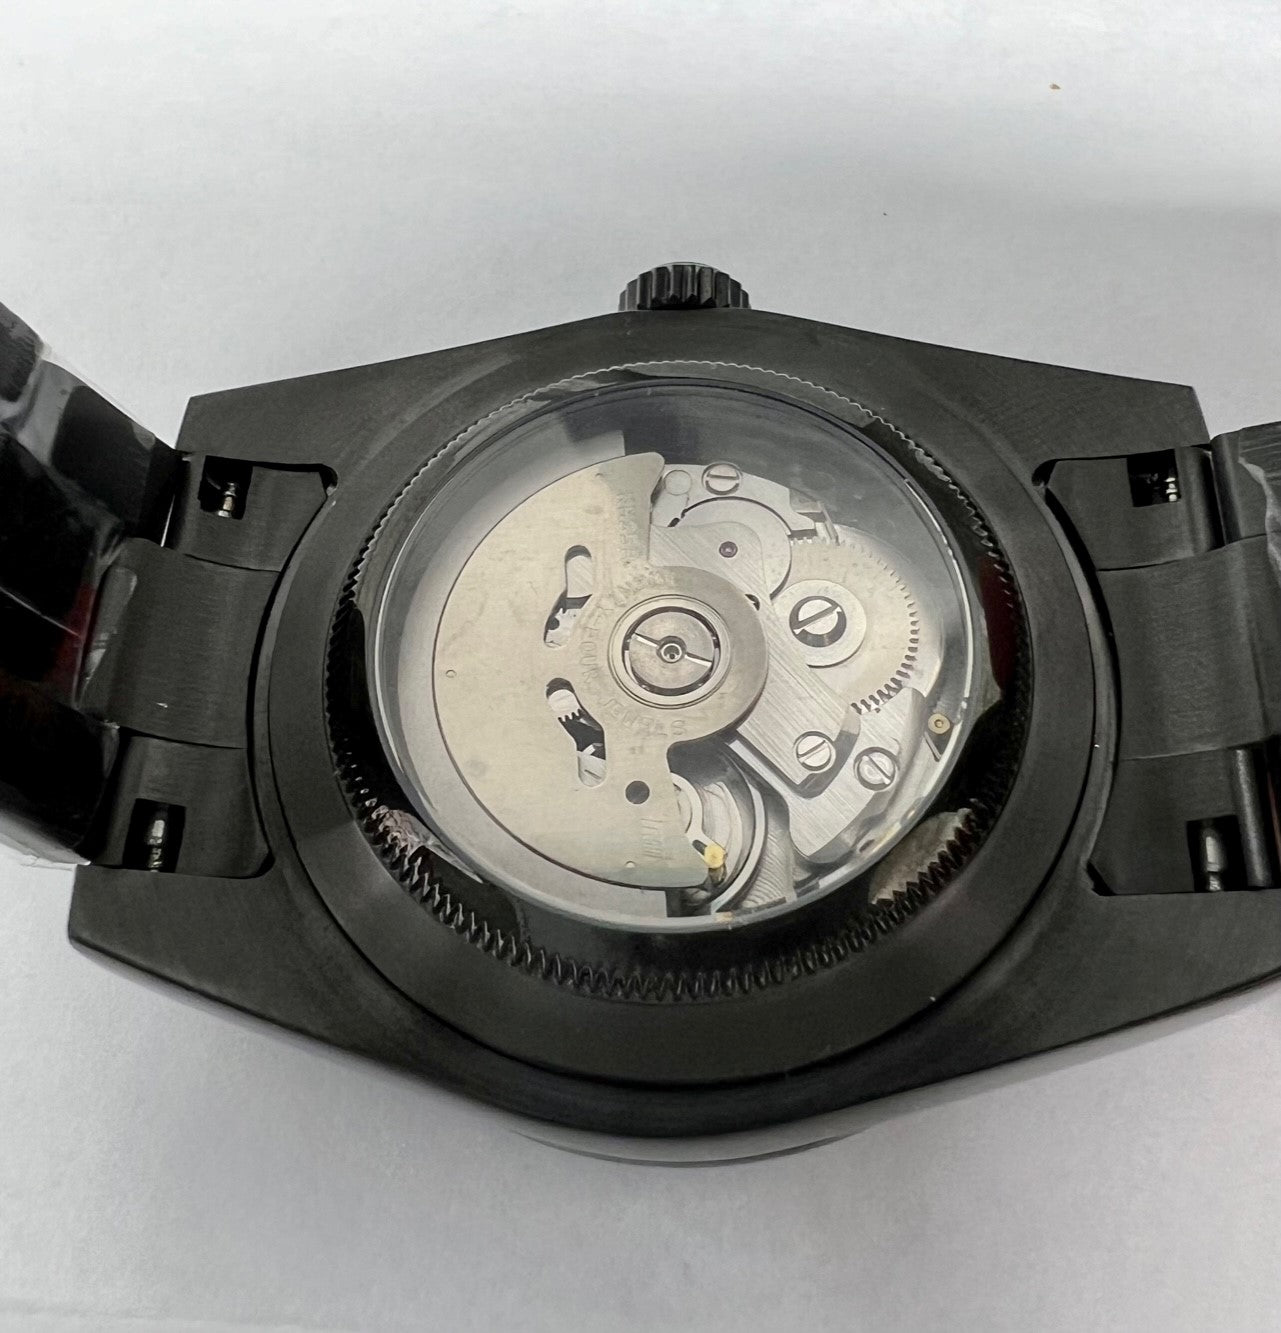 Black Stainless Steel Milgauss Style Watch with NH35 Automatic Movement, Black Dial, Stainless Steel Oyster Bracelet